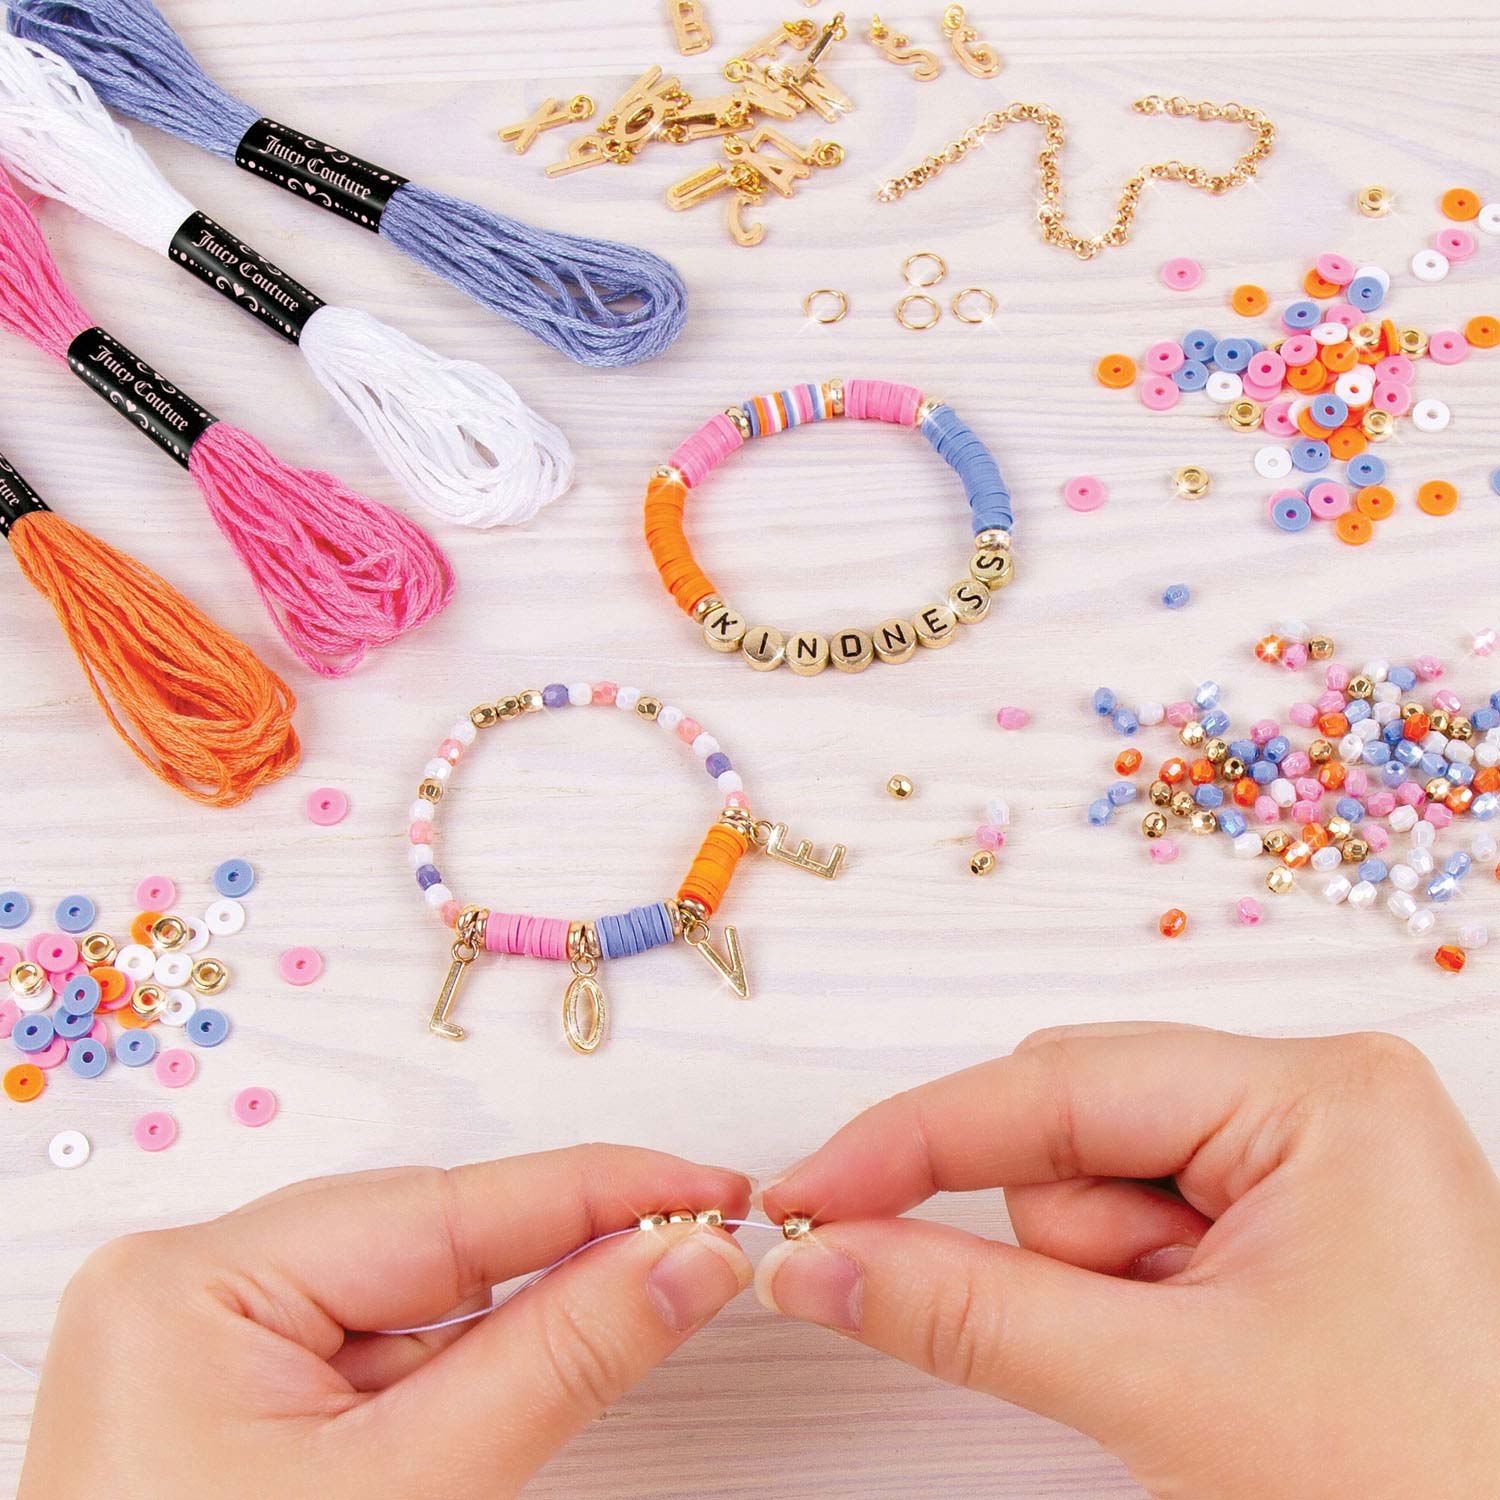 Make It Real - Making Juicy Couture Bracelets